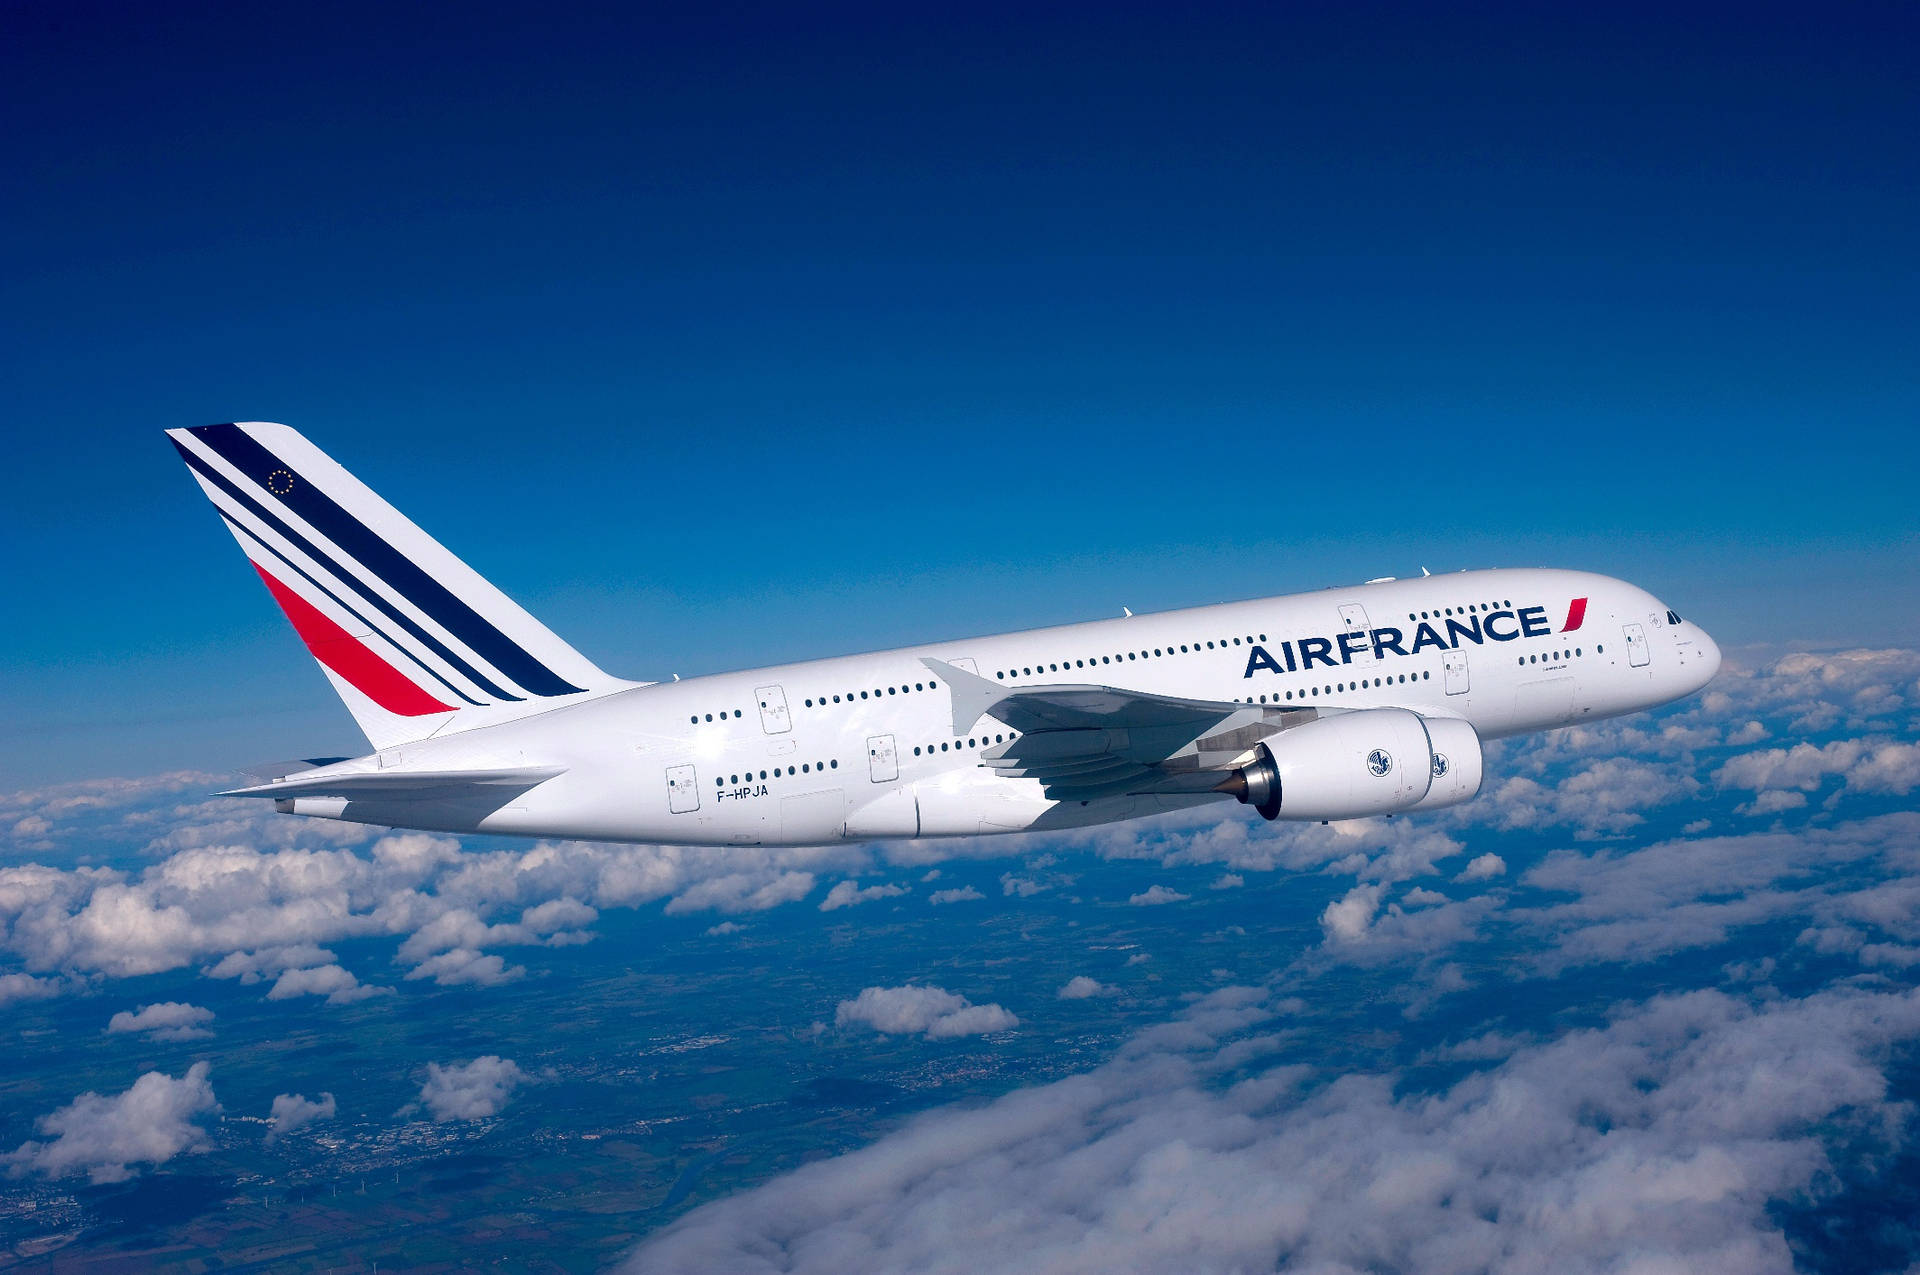 Aesthetic Air France Over The Clouds Wallpaper